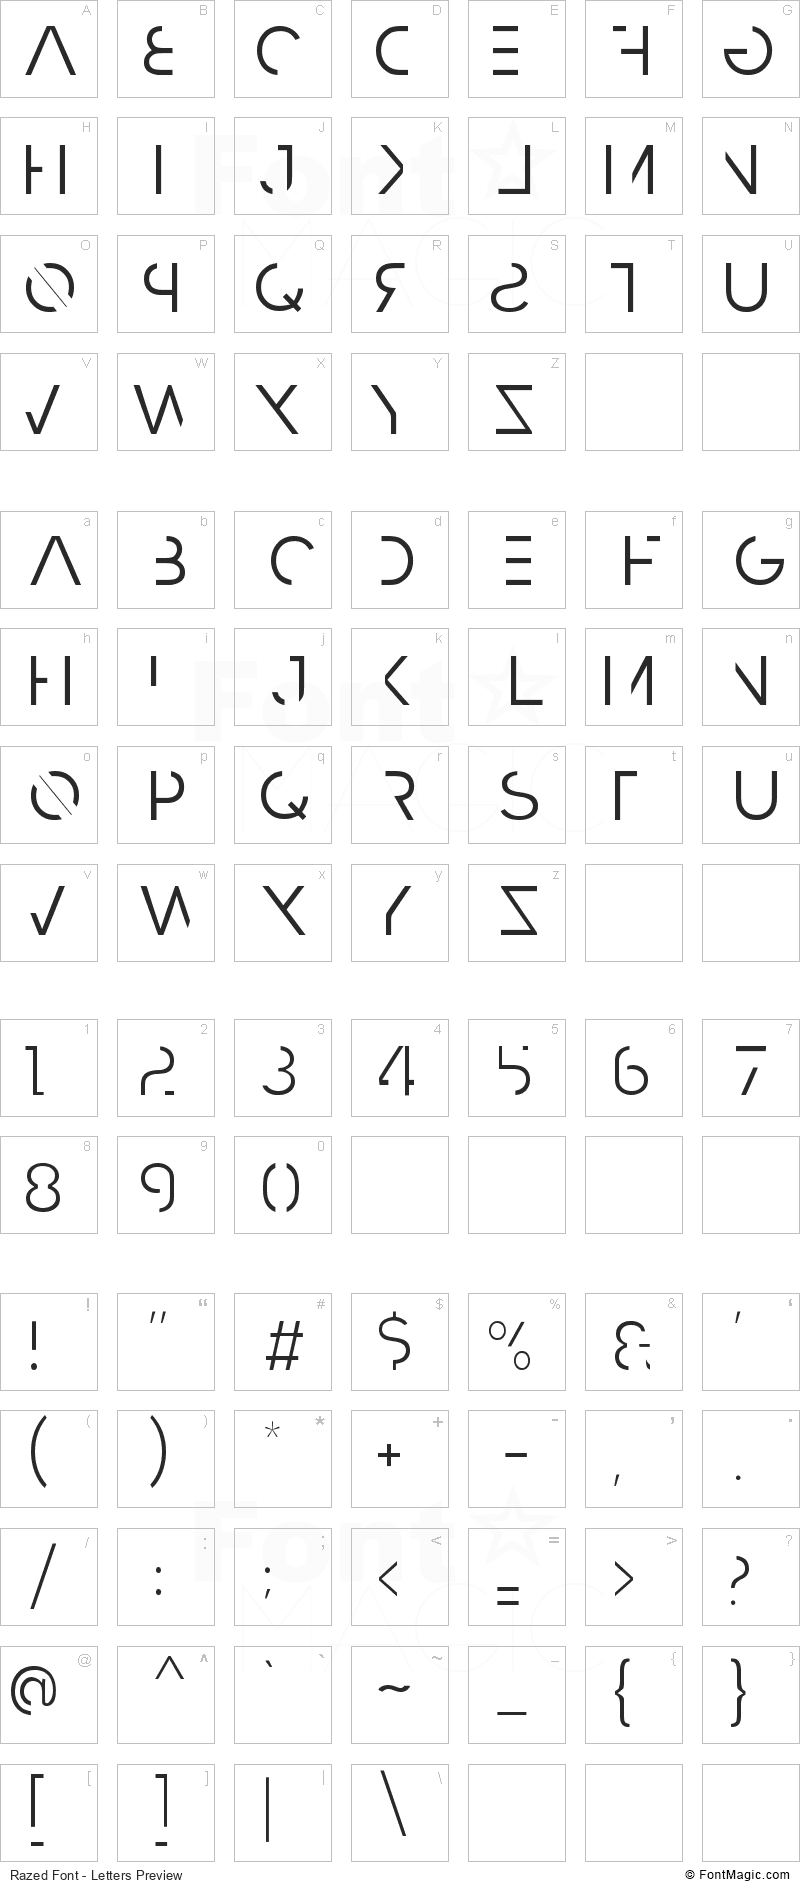 Razed Font - All Latters Preview Chart